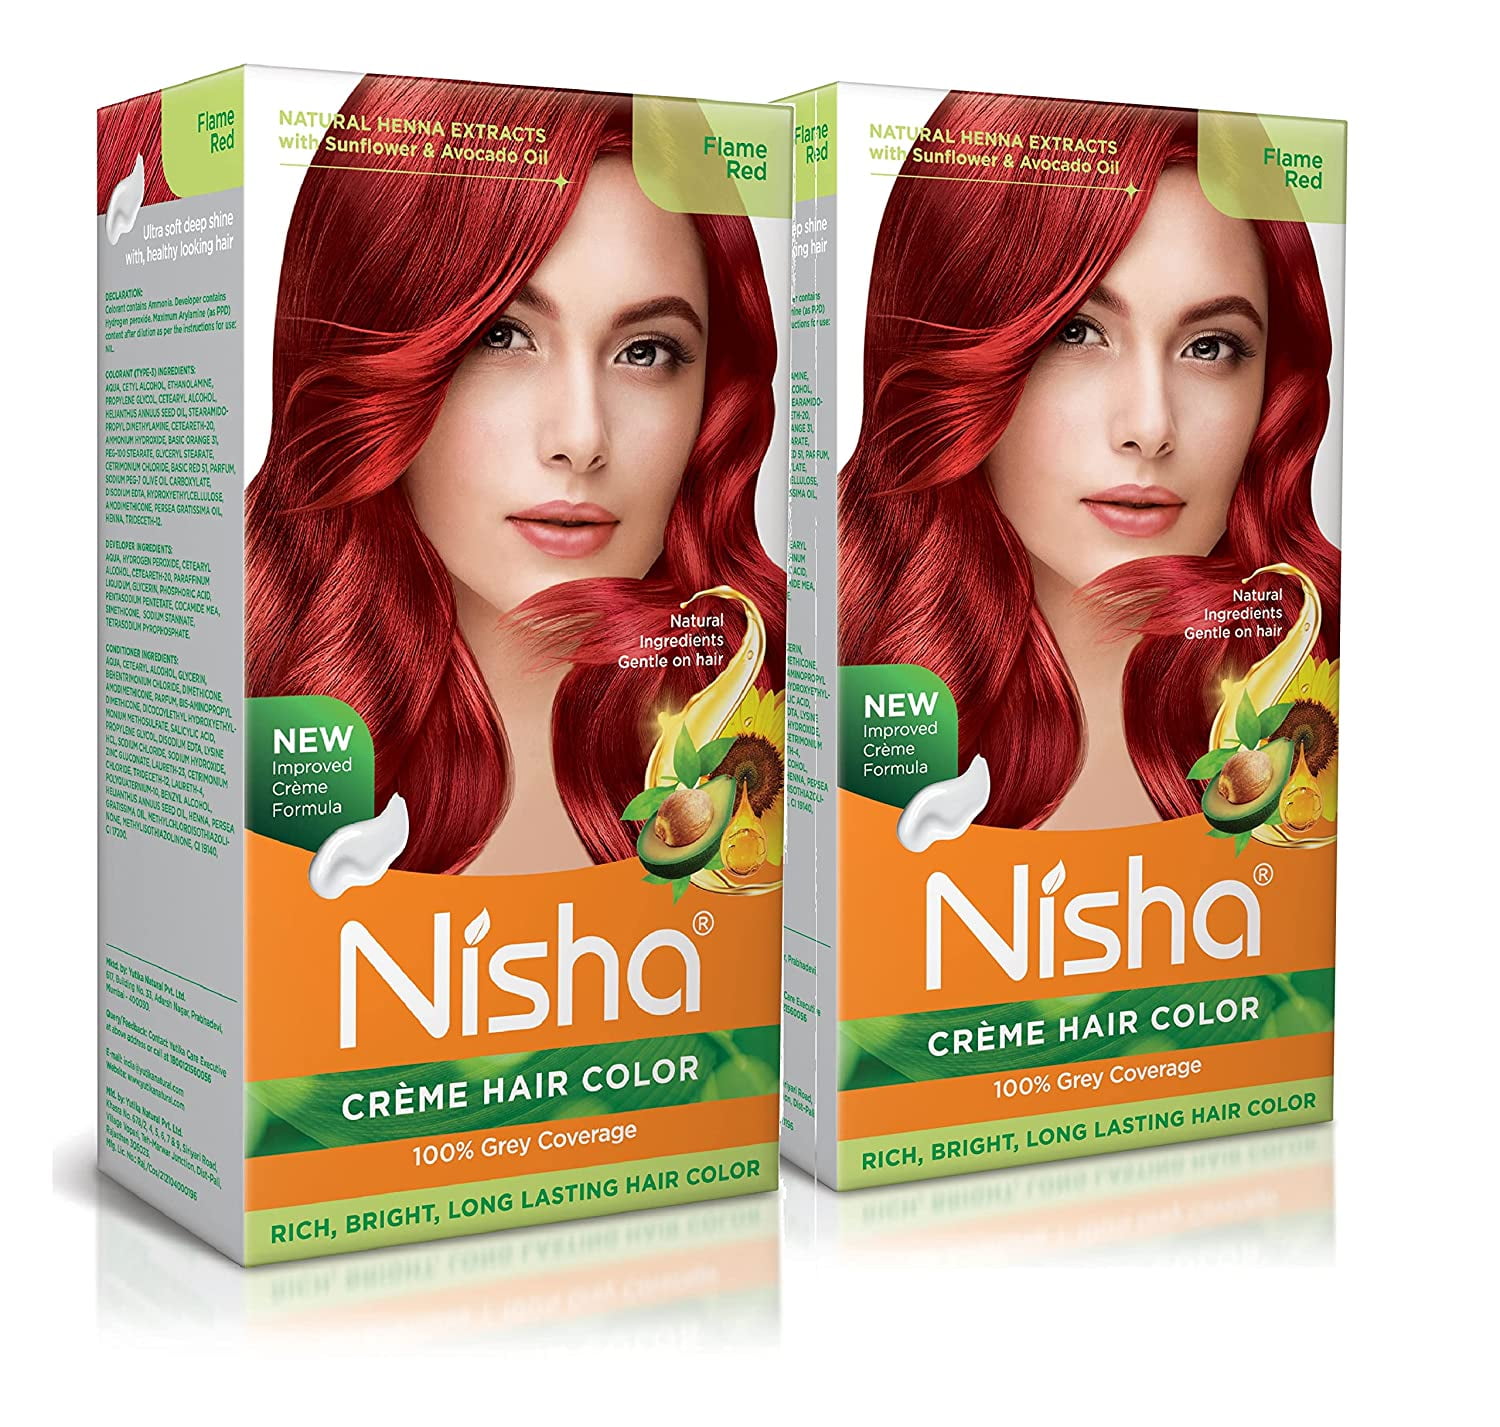 Creme Hair Color | Natural Henna Extract | Hair Dye Colour | Flame Red, 4.06 Fl Oz (Pack of 2)